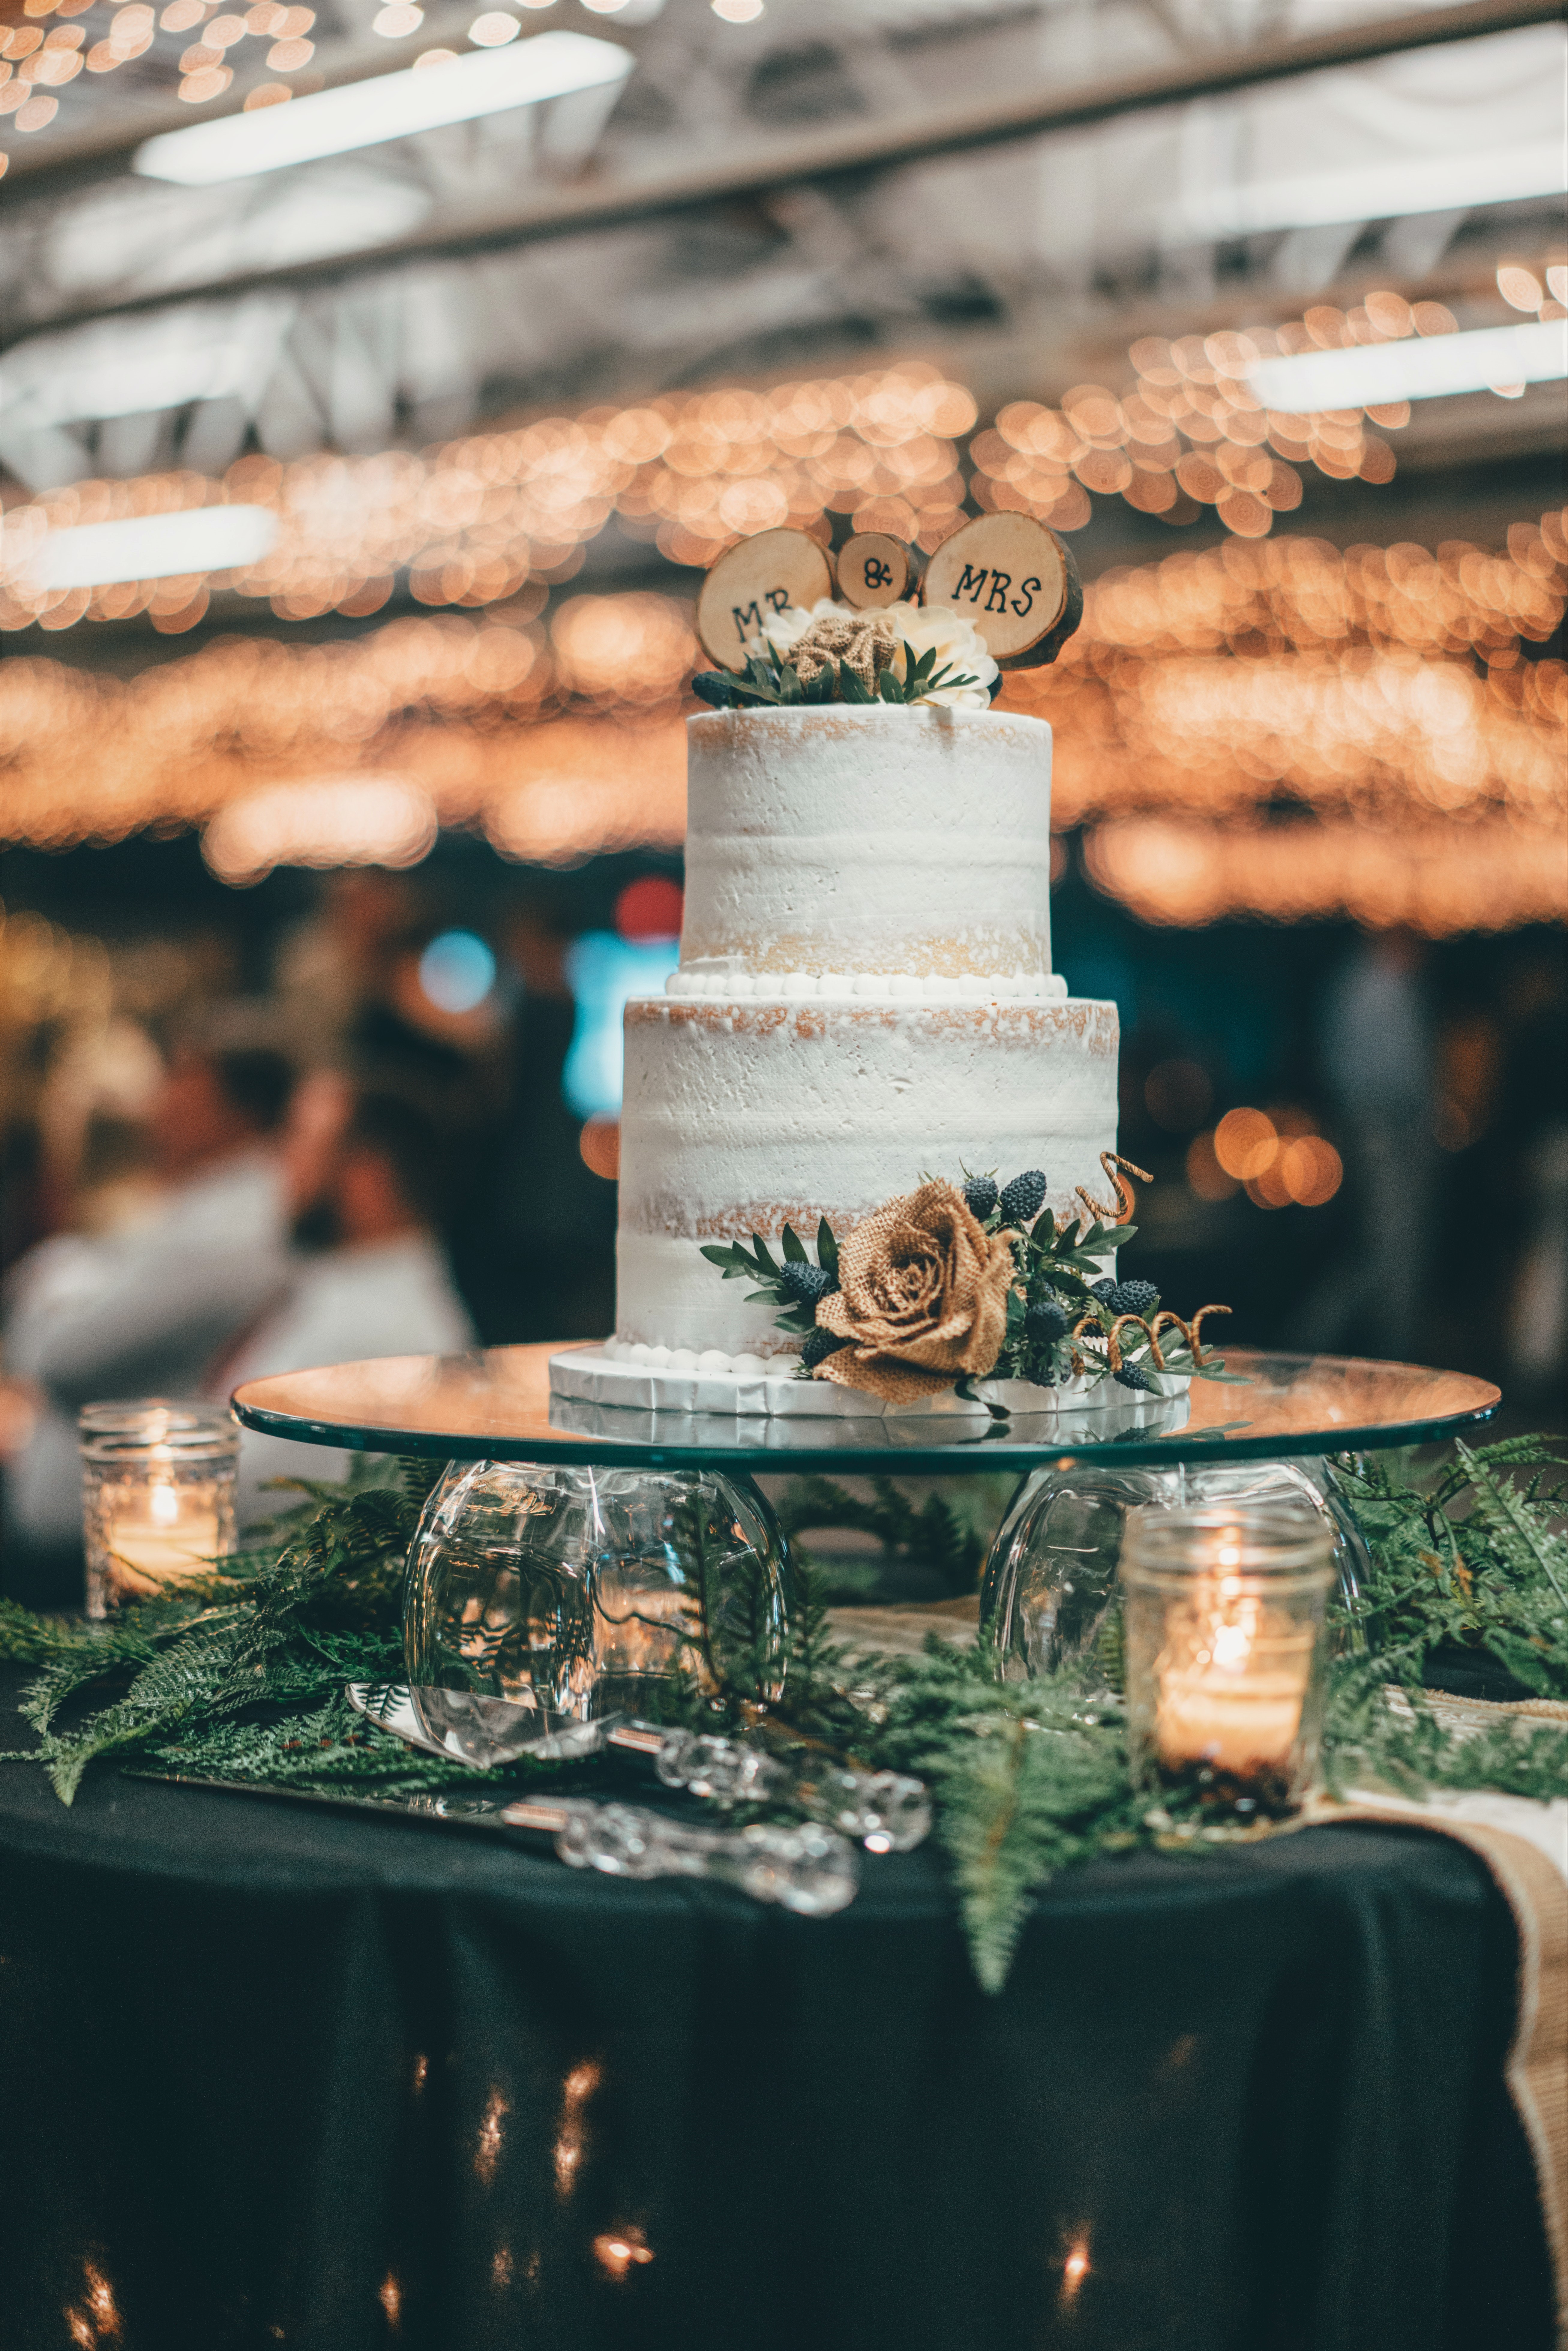 Top 3 Tips for Planning the Cake for Your Wedding Day